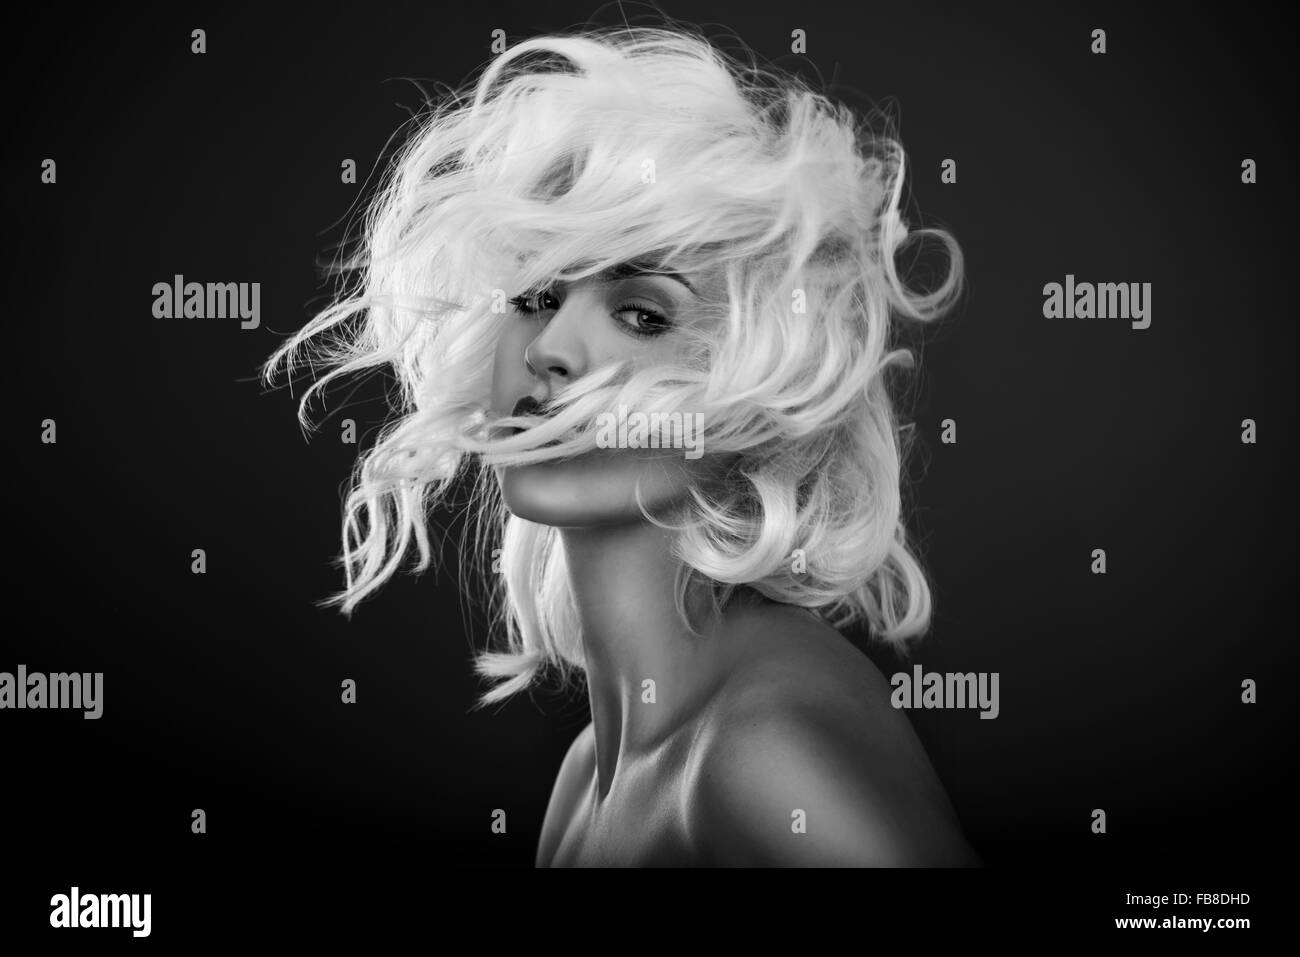 Black and white fashion portrait, model with white hair blowing. Hair salon Stock Photo